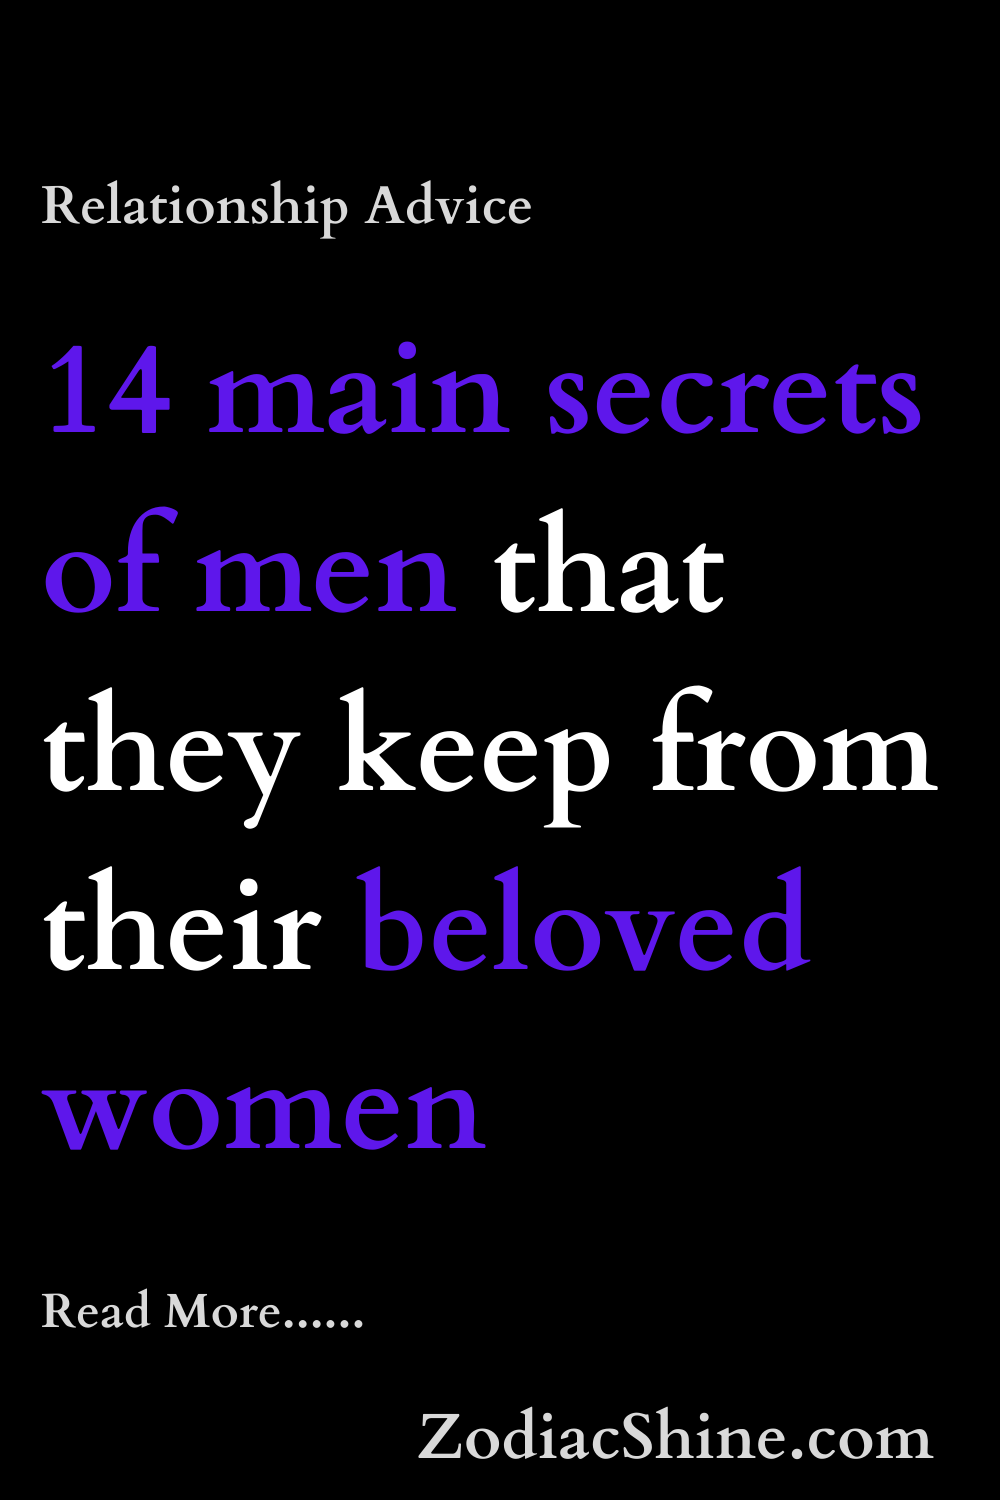 14 main secrets of men that they keep from their beloved women